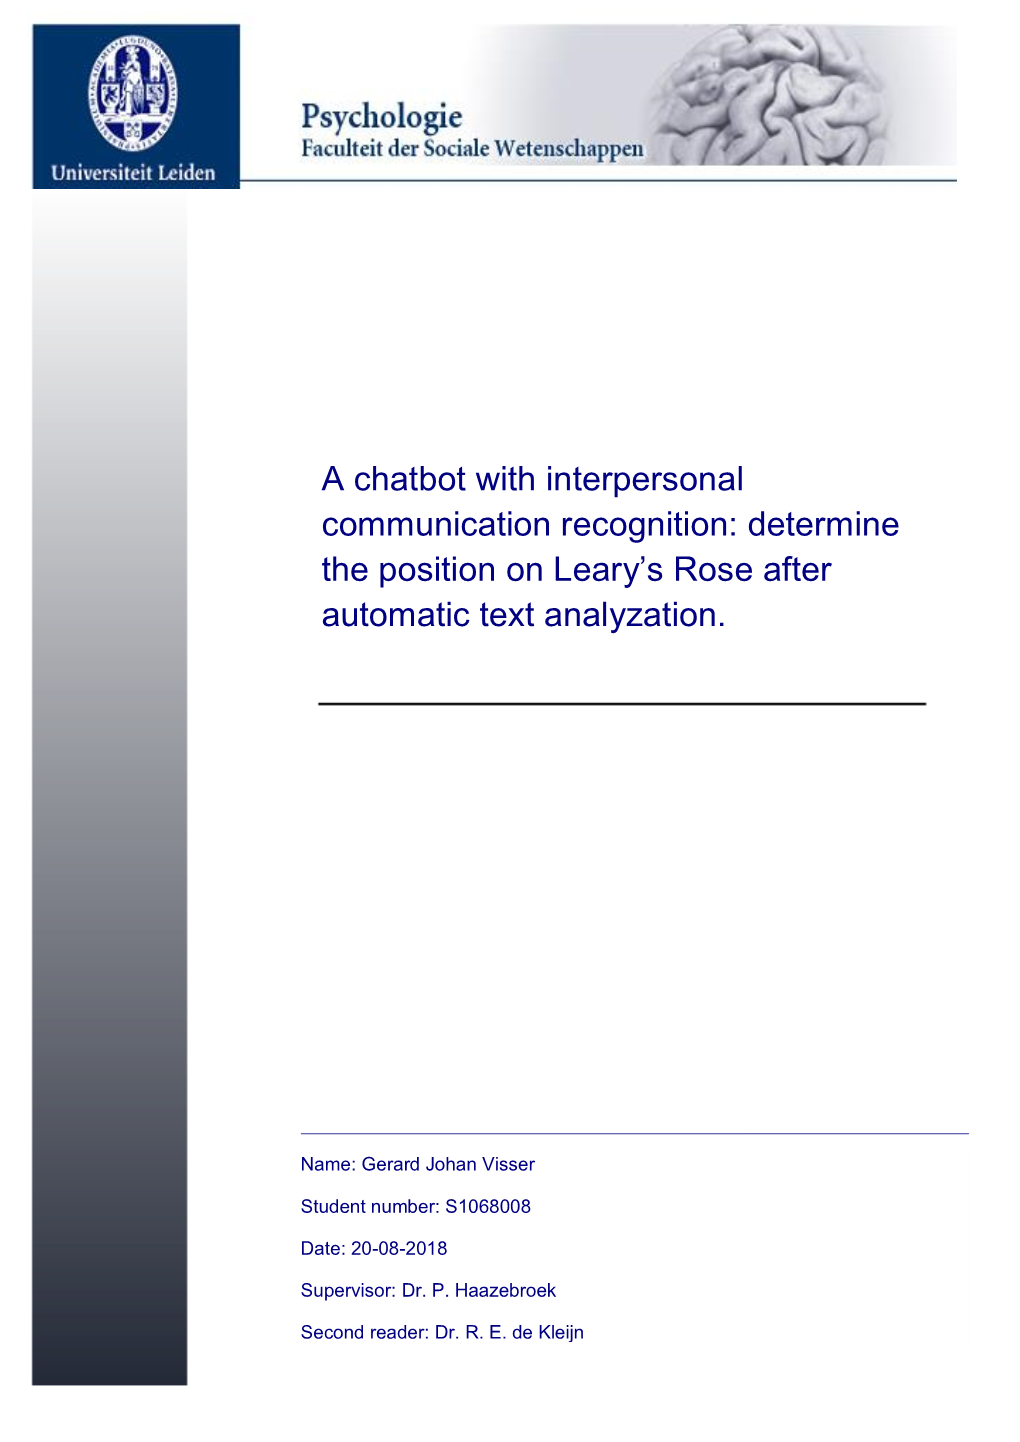 A Chatbot with Interpersonal Communication Recognition: Determine the Position on Leary’S Rose After